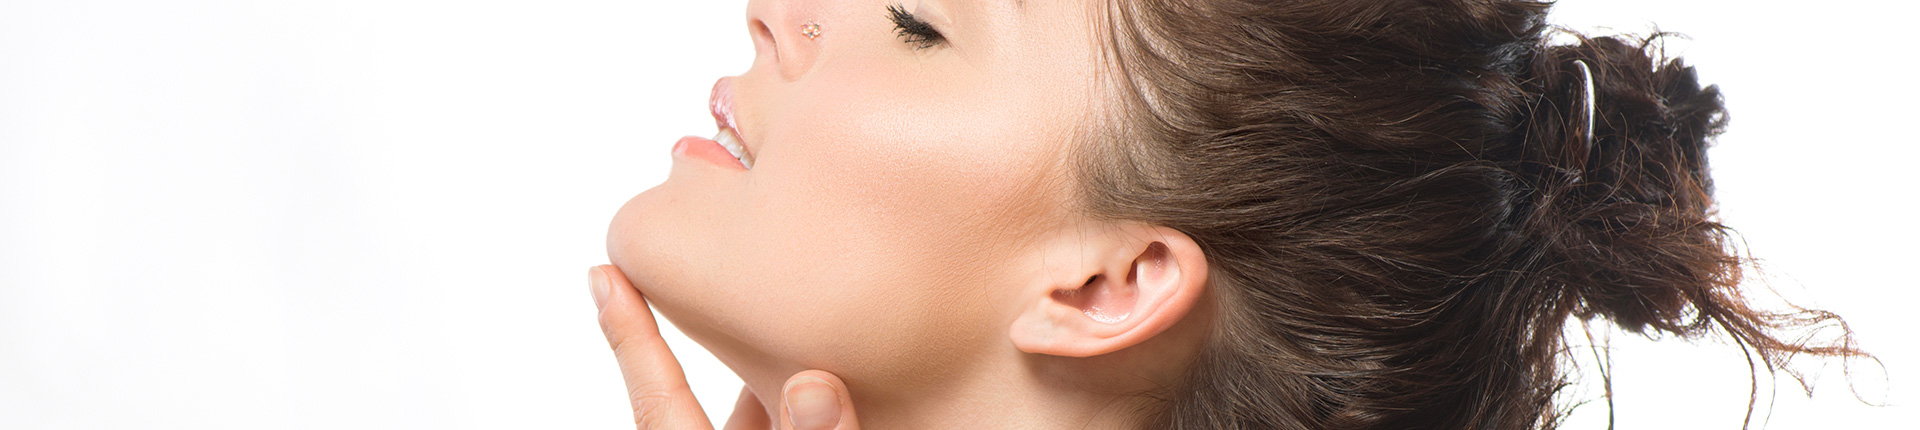 Learn More About the Kybella Treatment for Dissolving a Double Chin